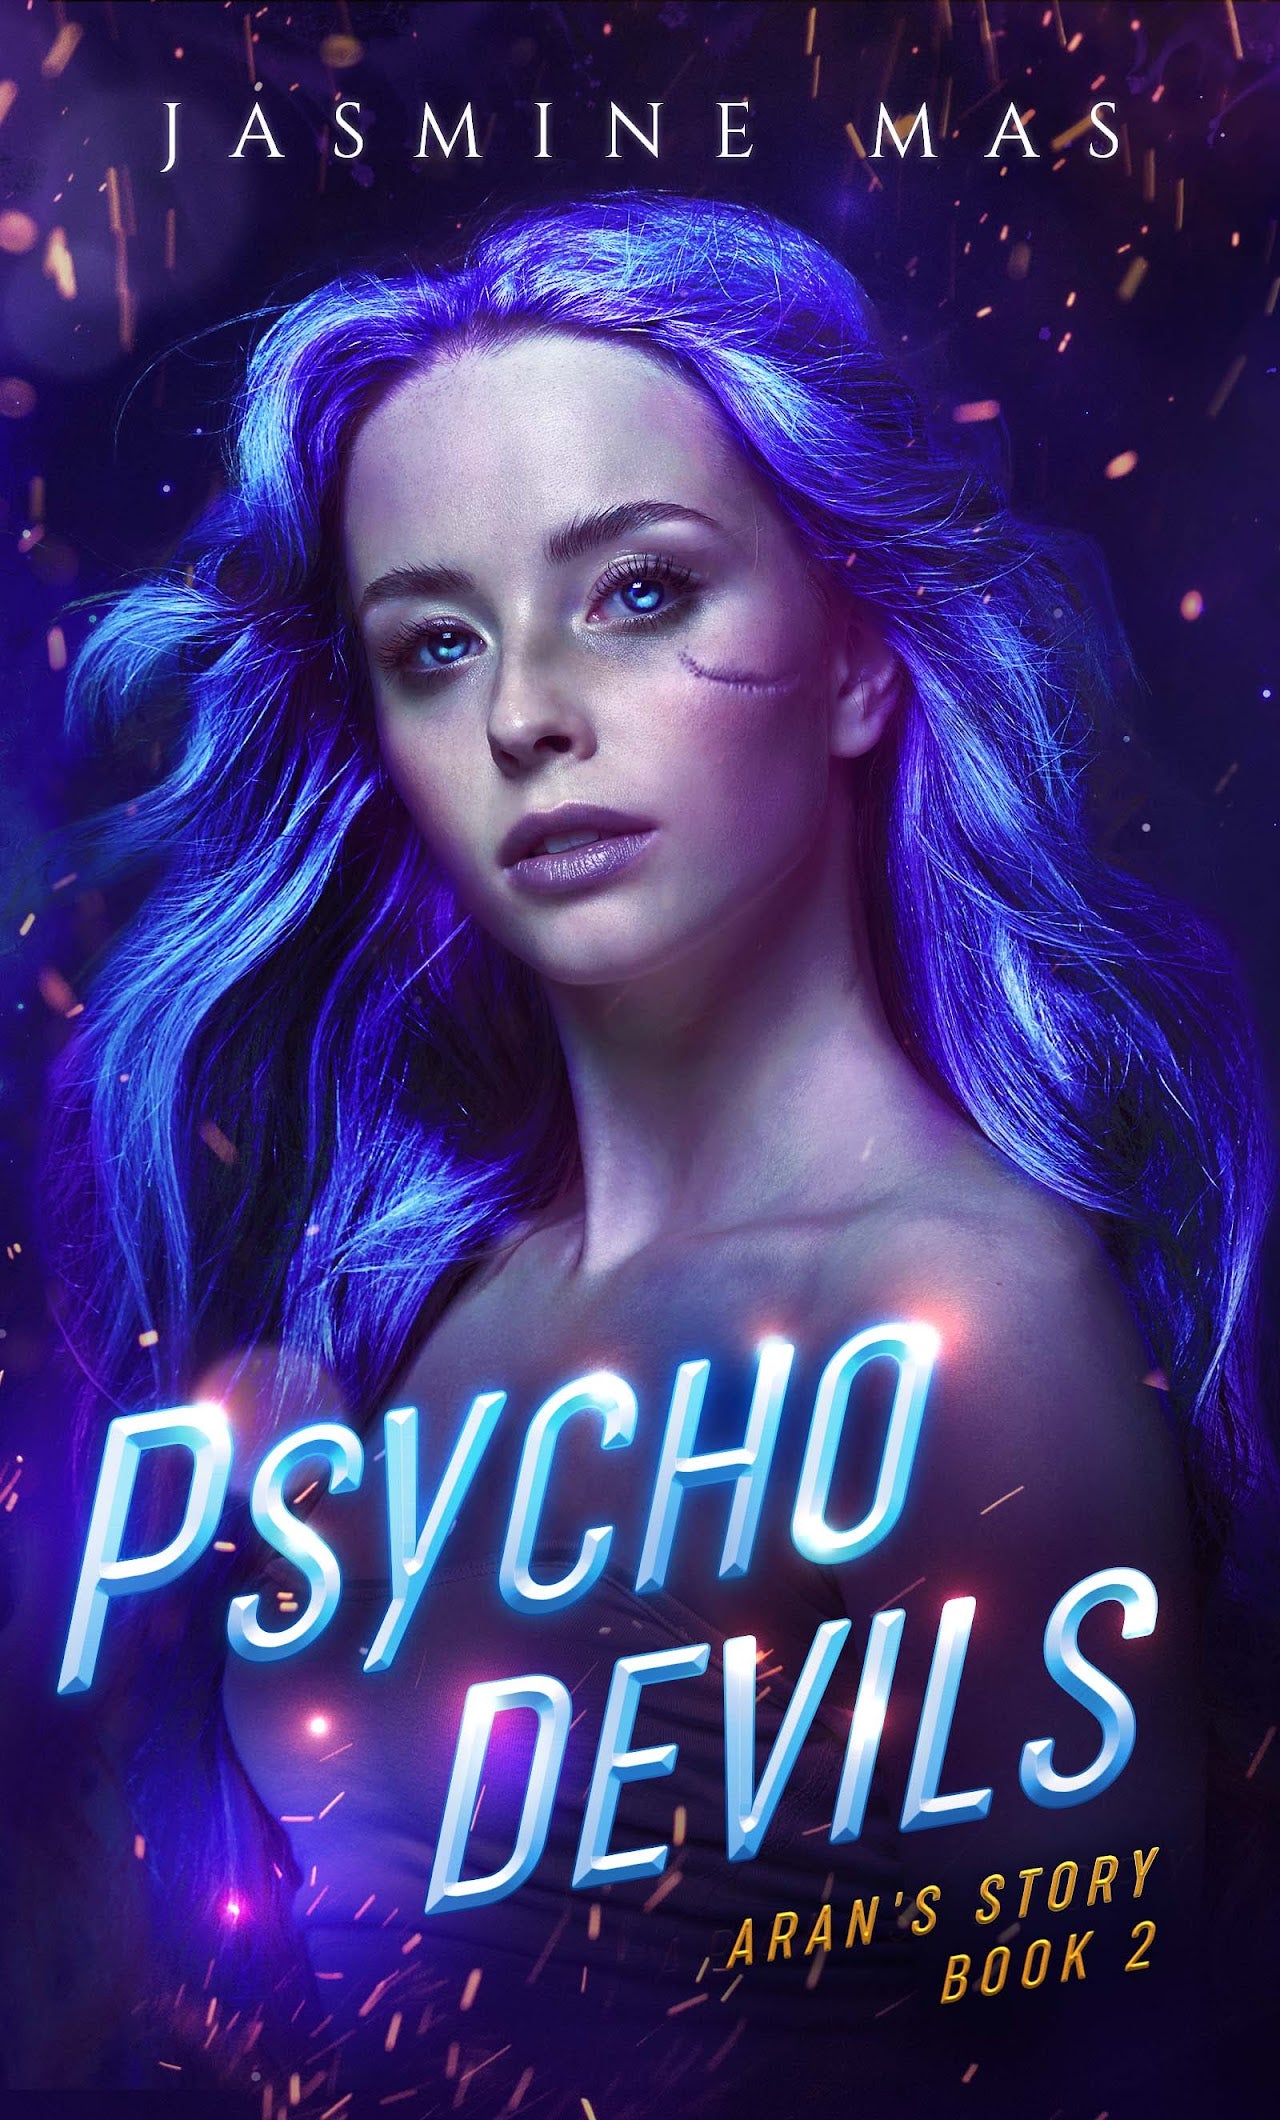 Jasmine Mas - Psycho Shifters is out now in Paperback! T-minus 9